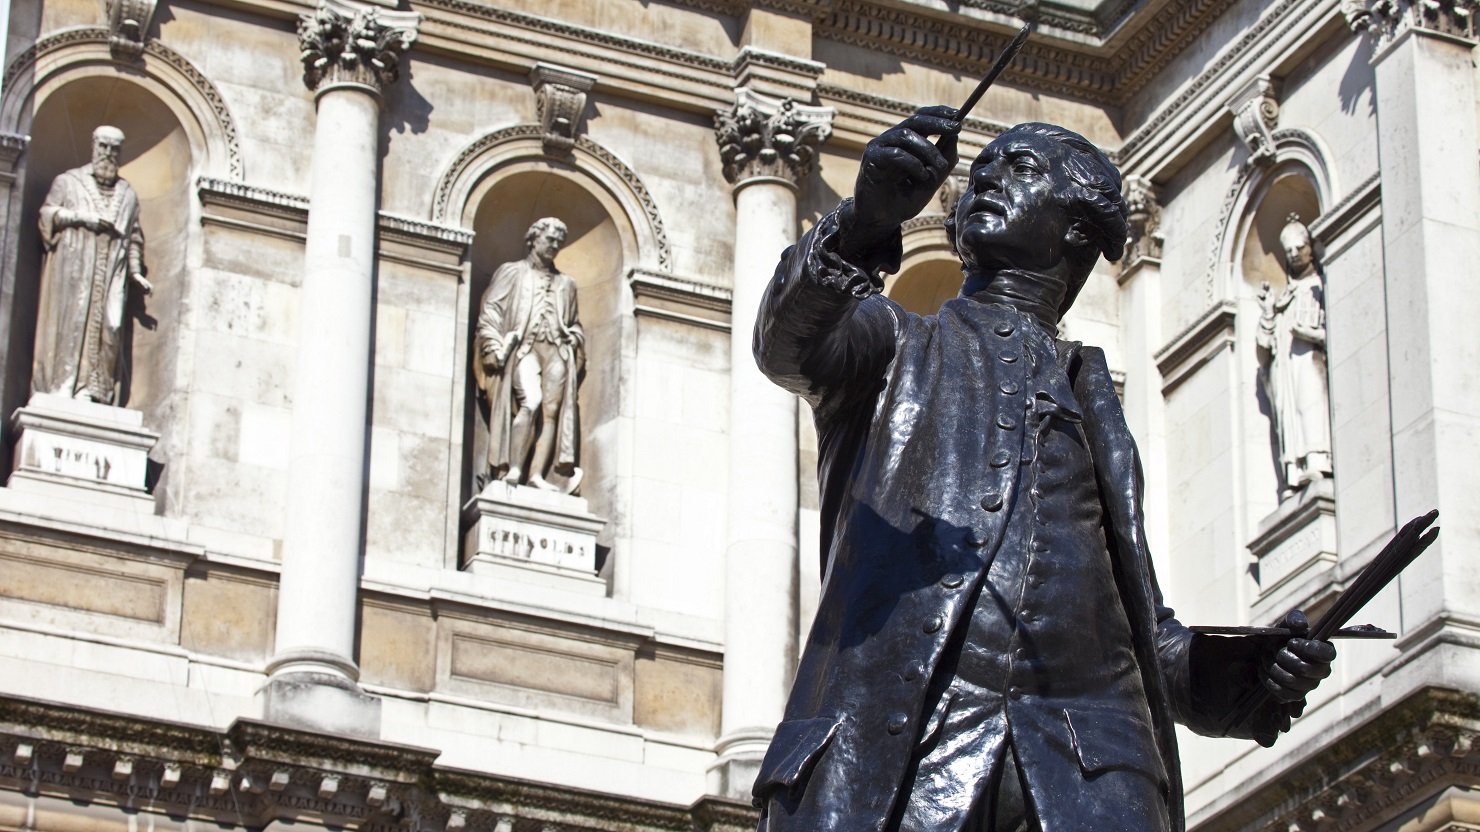 Reynolds statue at Royal Academy